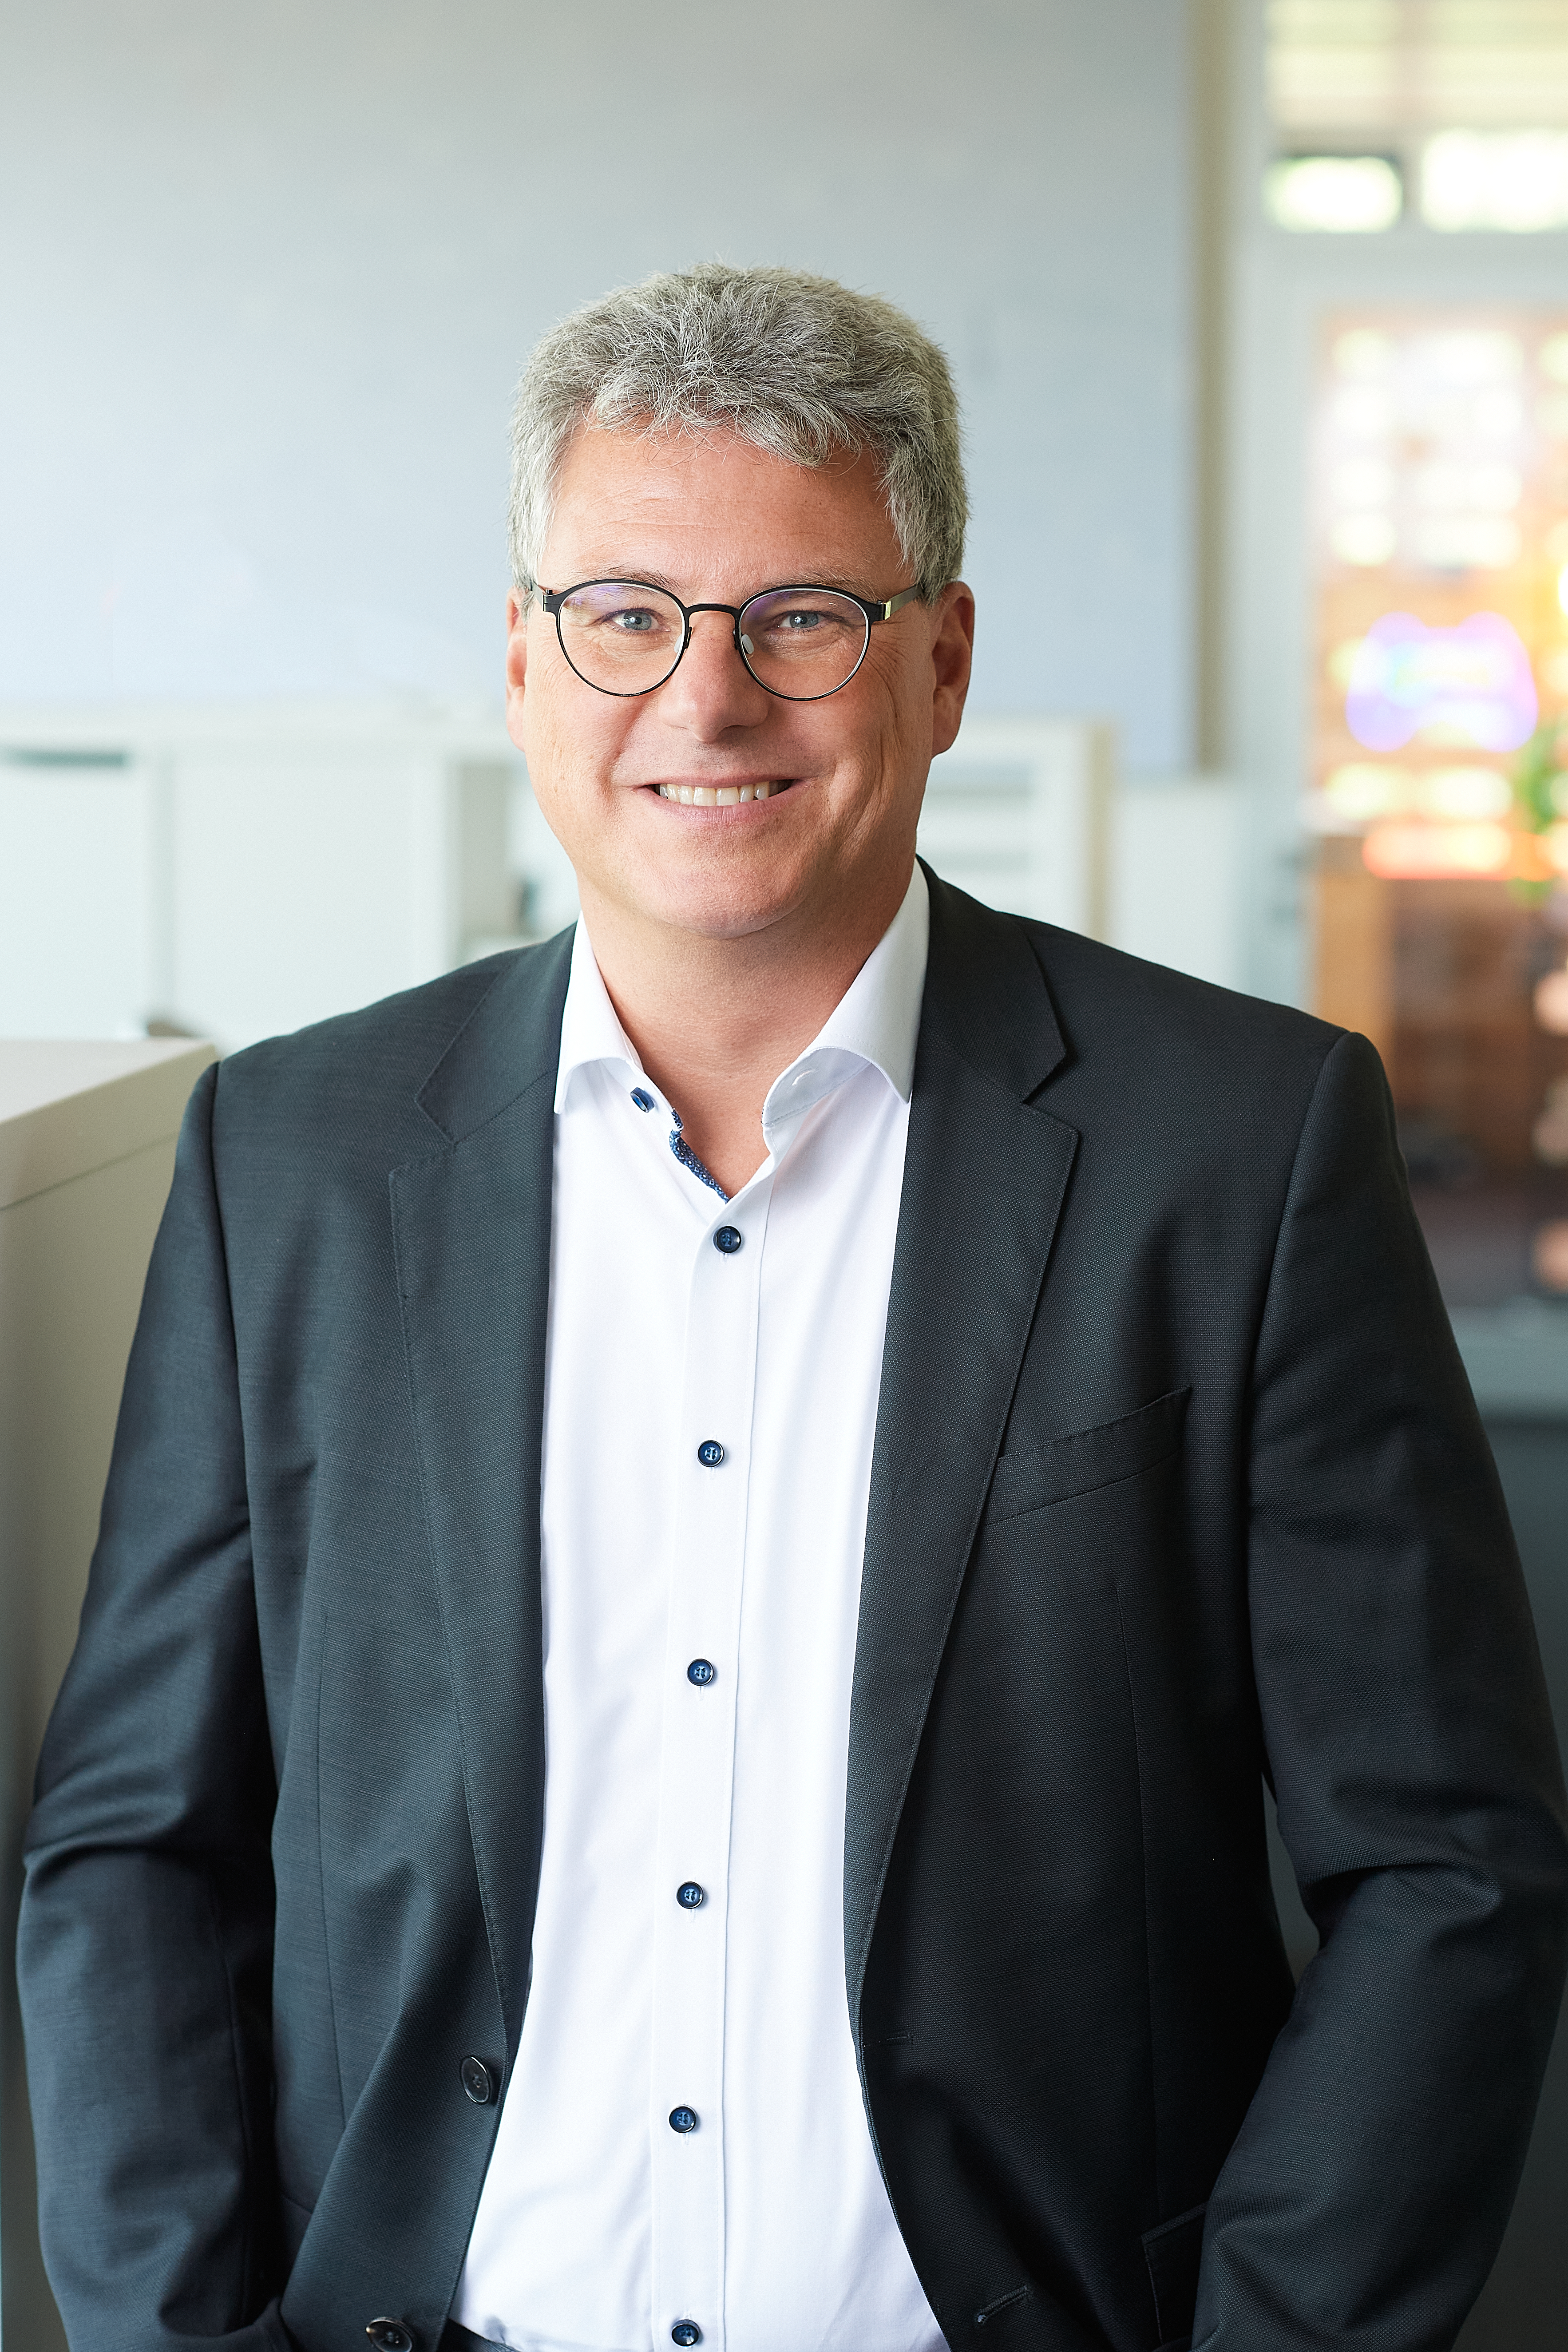 Christian Wachter, CEO